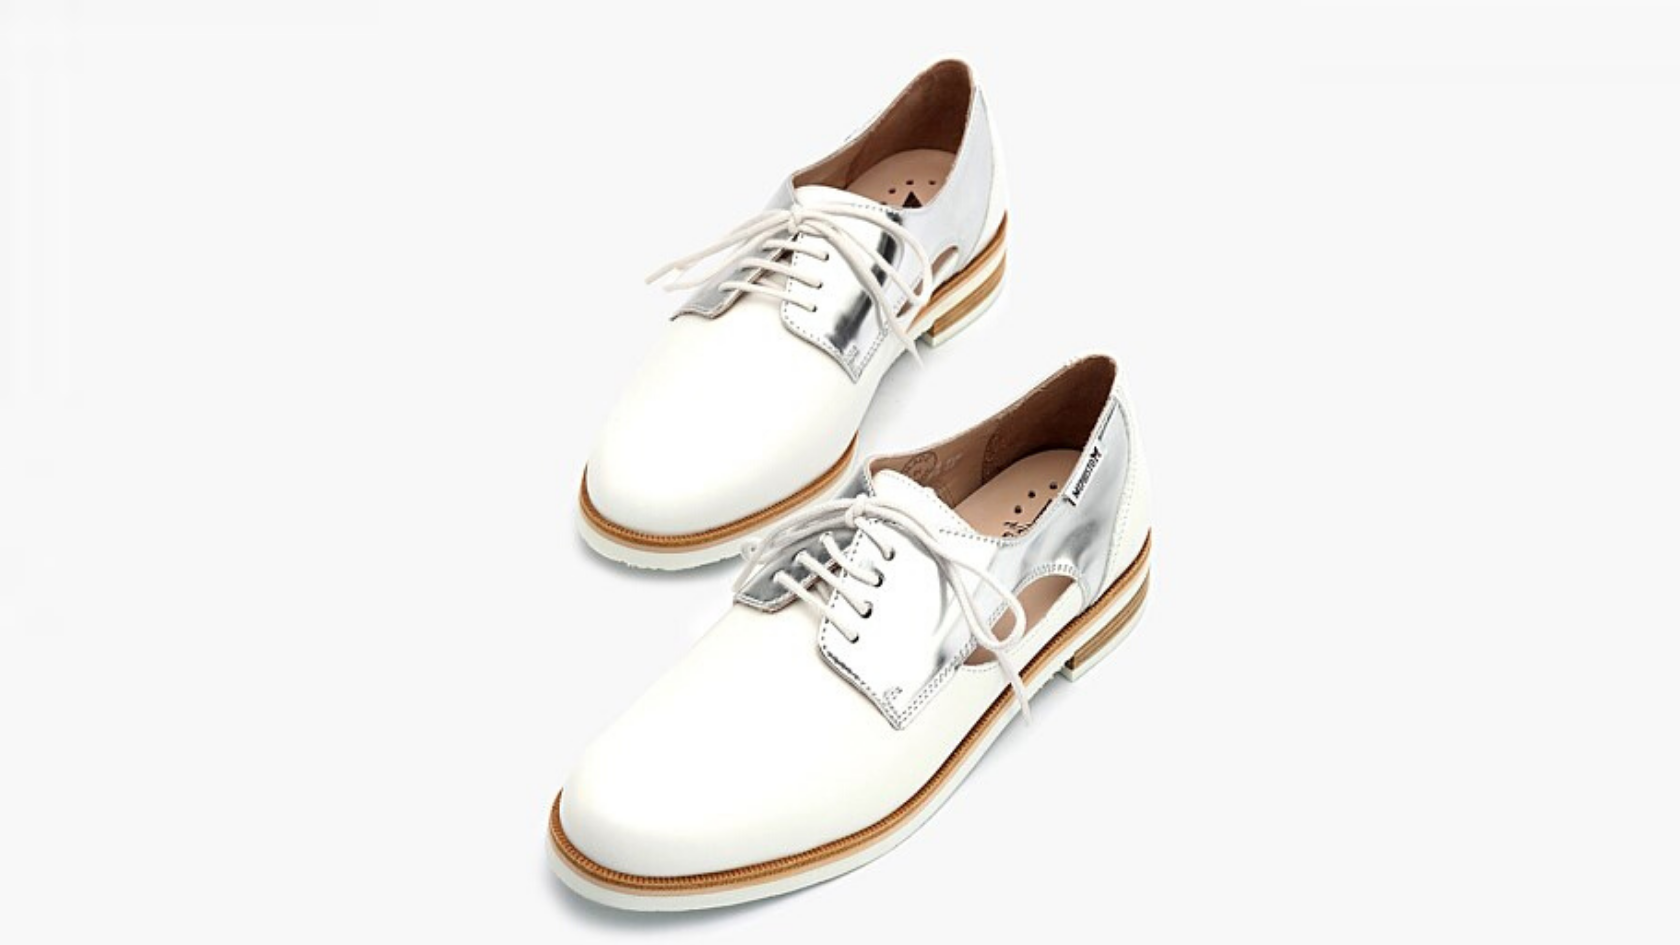 Pair of white loafers with glossy silver panelling suspended against a neutral background.